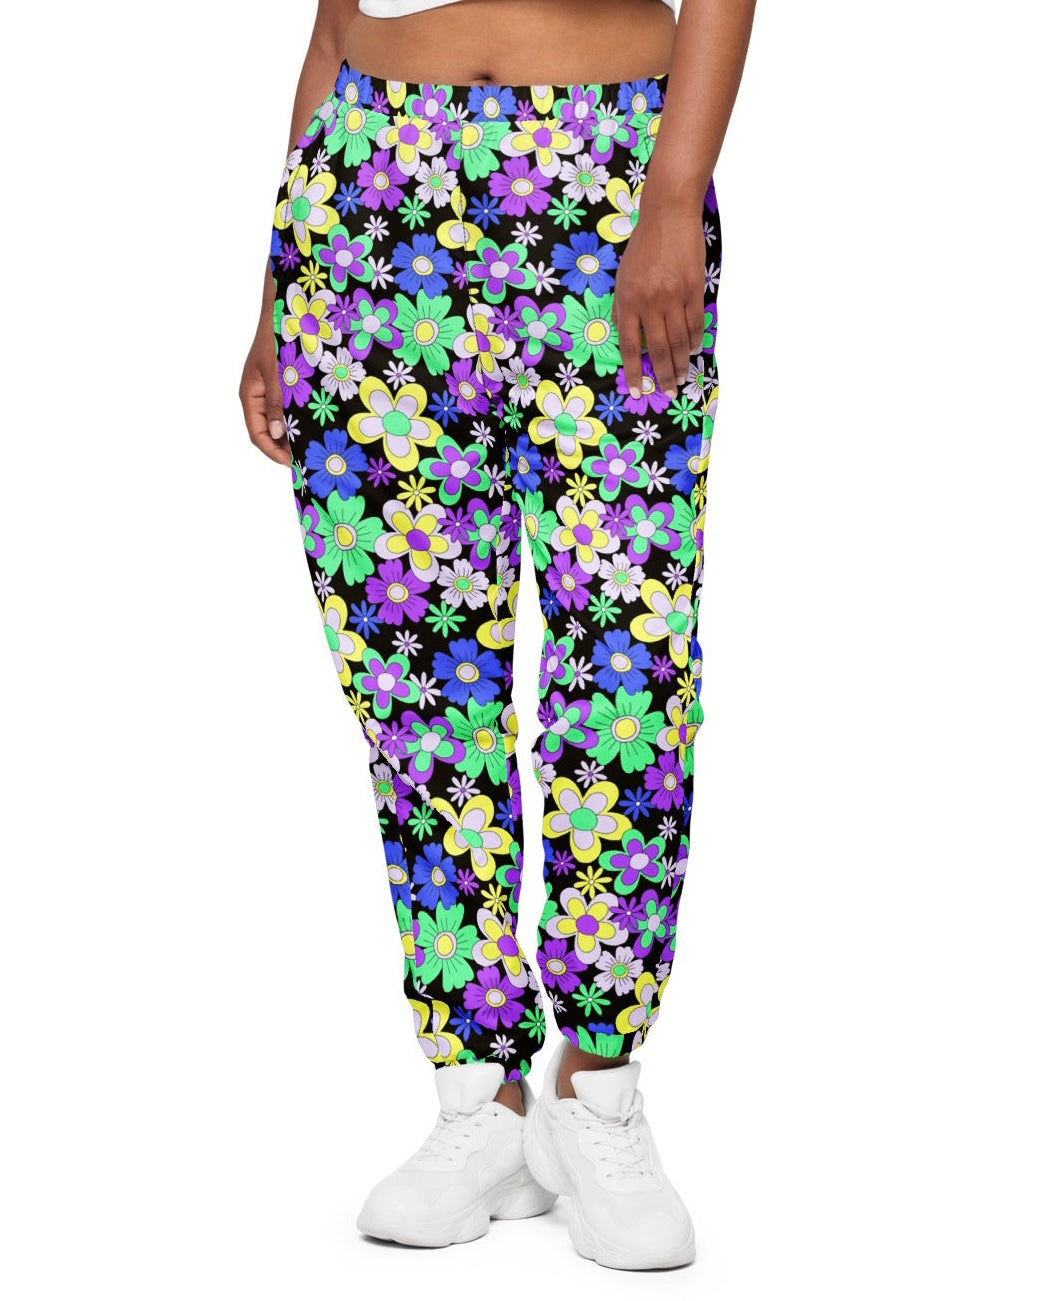 Crazy Daisy Track Pants, Track Pants, - One Stop Rave